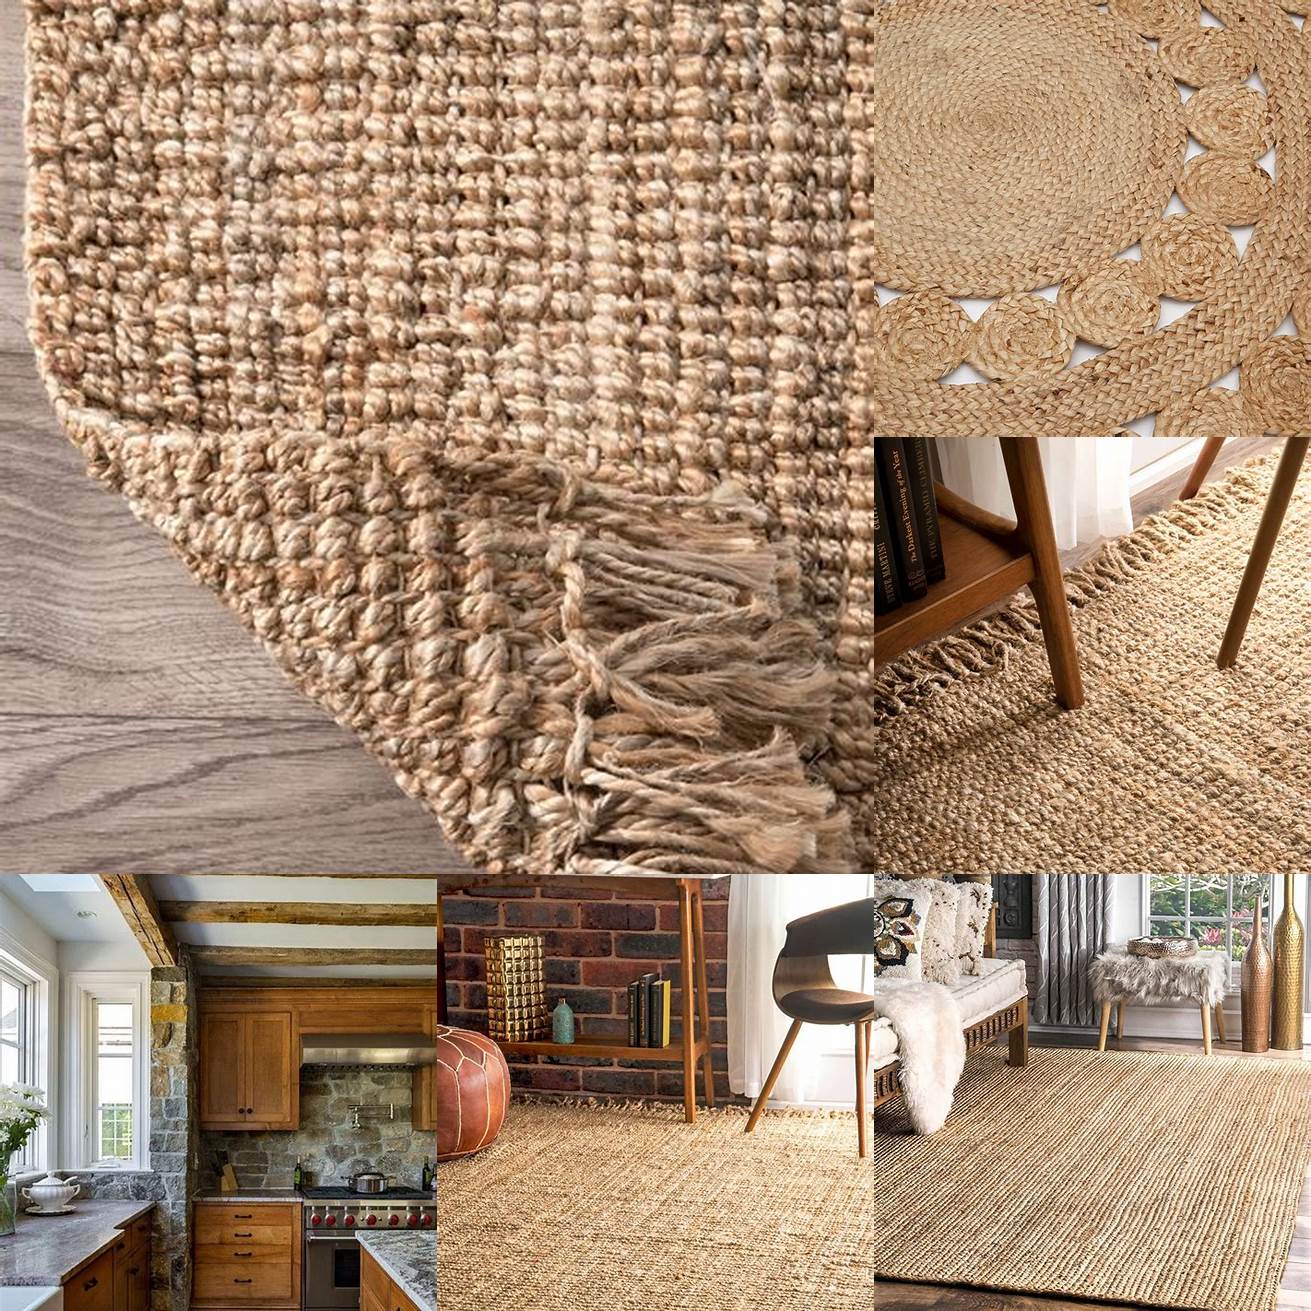 Natural fibers such as jute or bamboo add a rustic and earthy feel to your kitchen